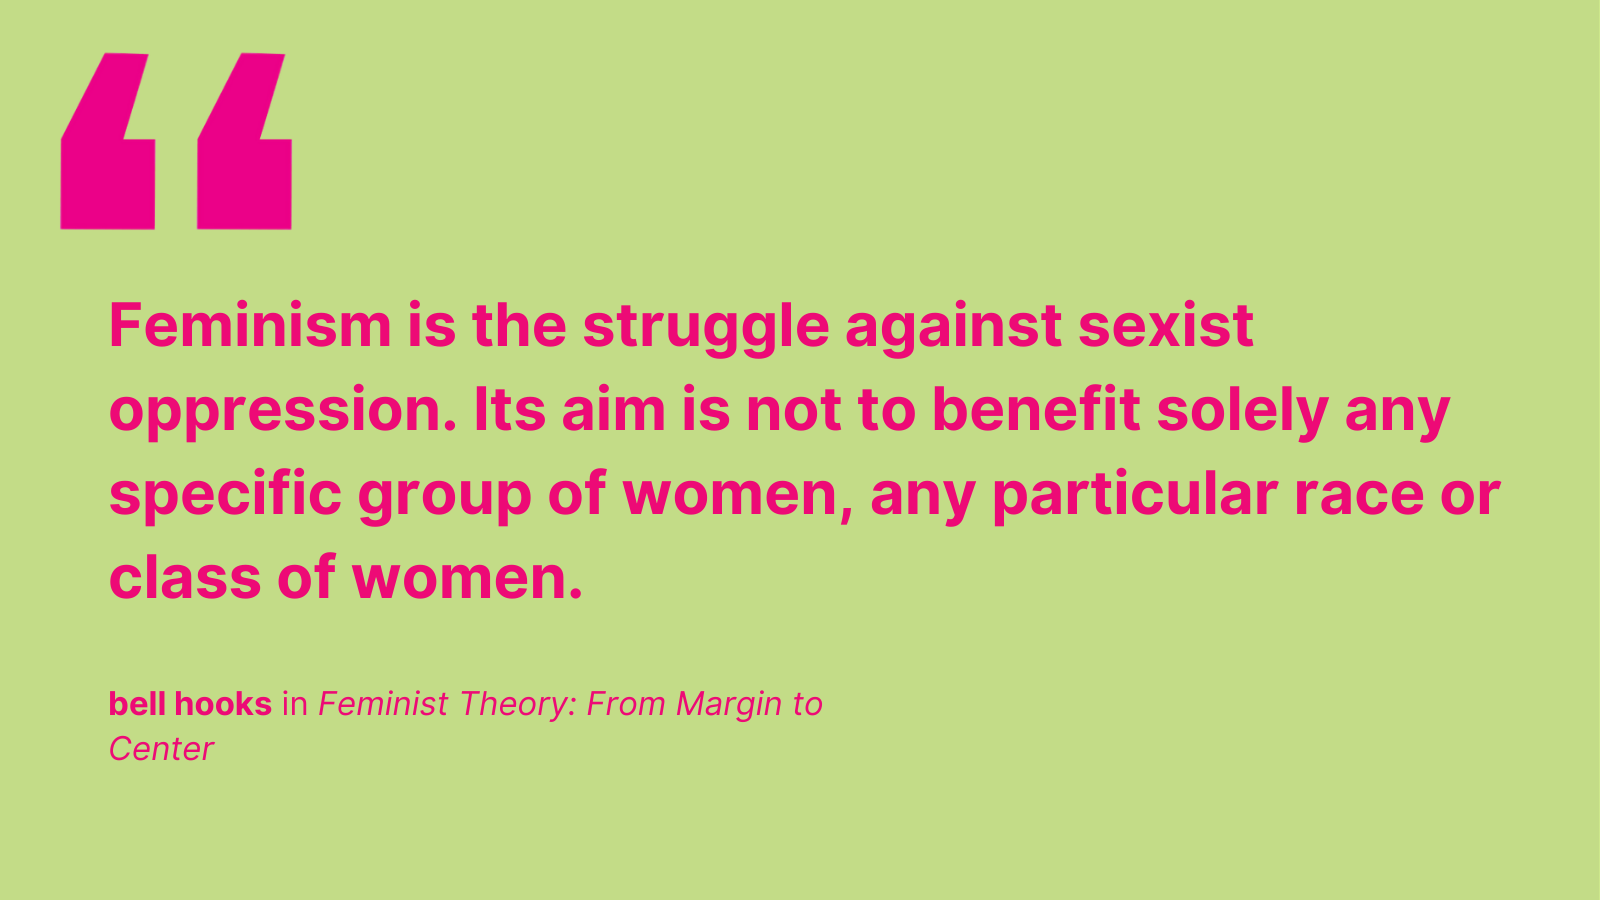 "Feminism is the struggle against sexist oppression. Its aim is not to benefit solely any specific group of women, any particular race or class of women." - bell hooks in Feminist Theory: From Margin to Center